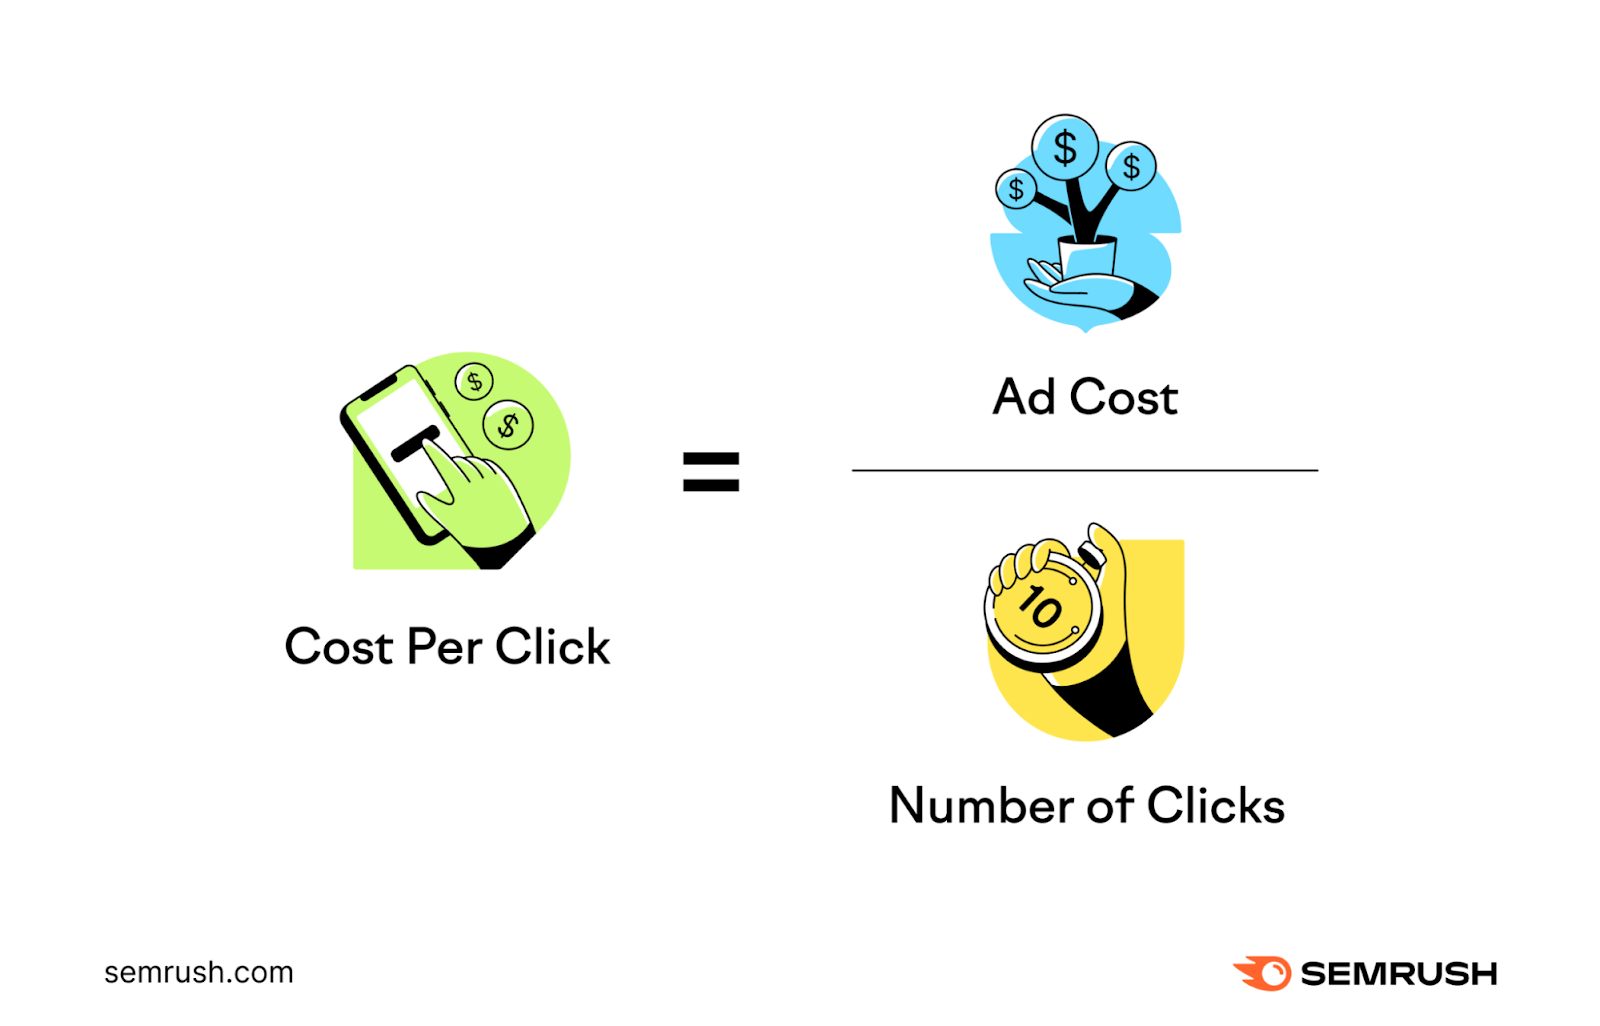 How to Find Out How Much a Keyword Costs in PPC Advertising